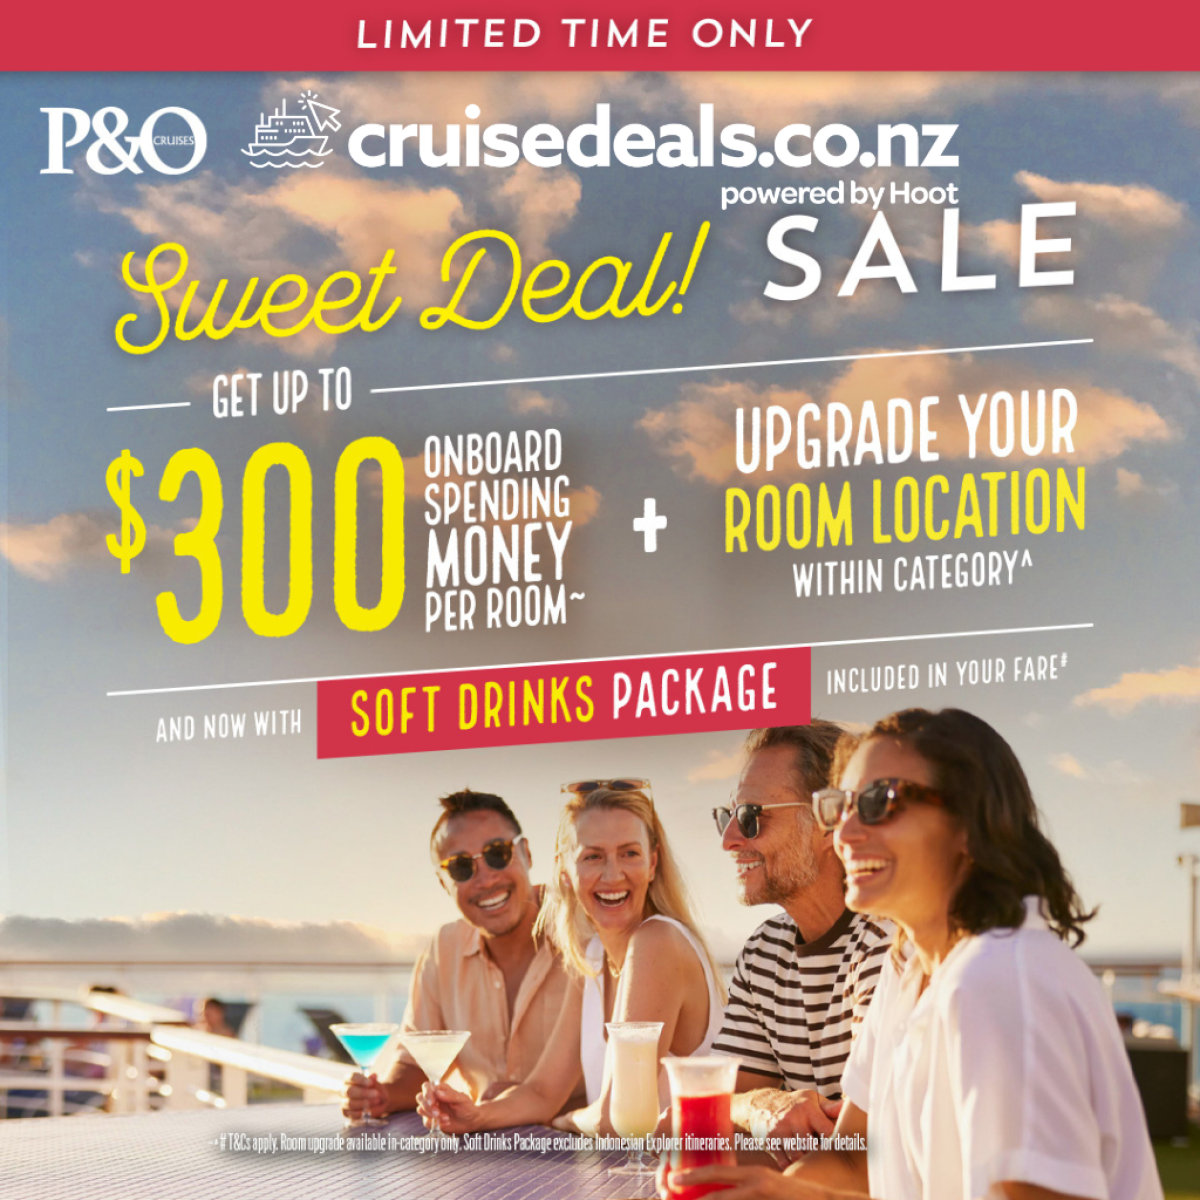 P&O Sweet Cruise Deals Free Upgrades Free Spending Money & Free Soft Drinks Package